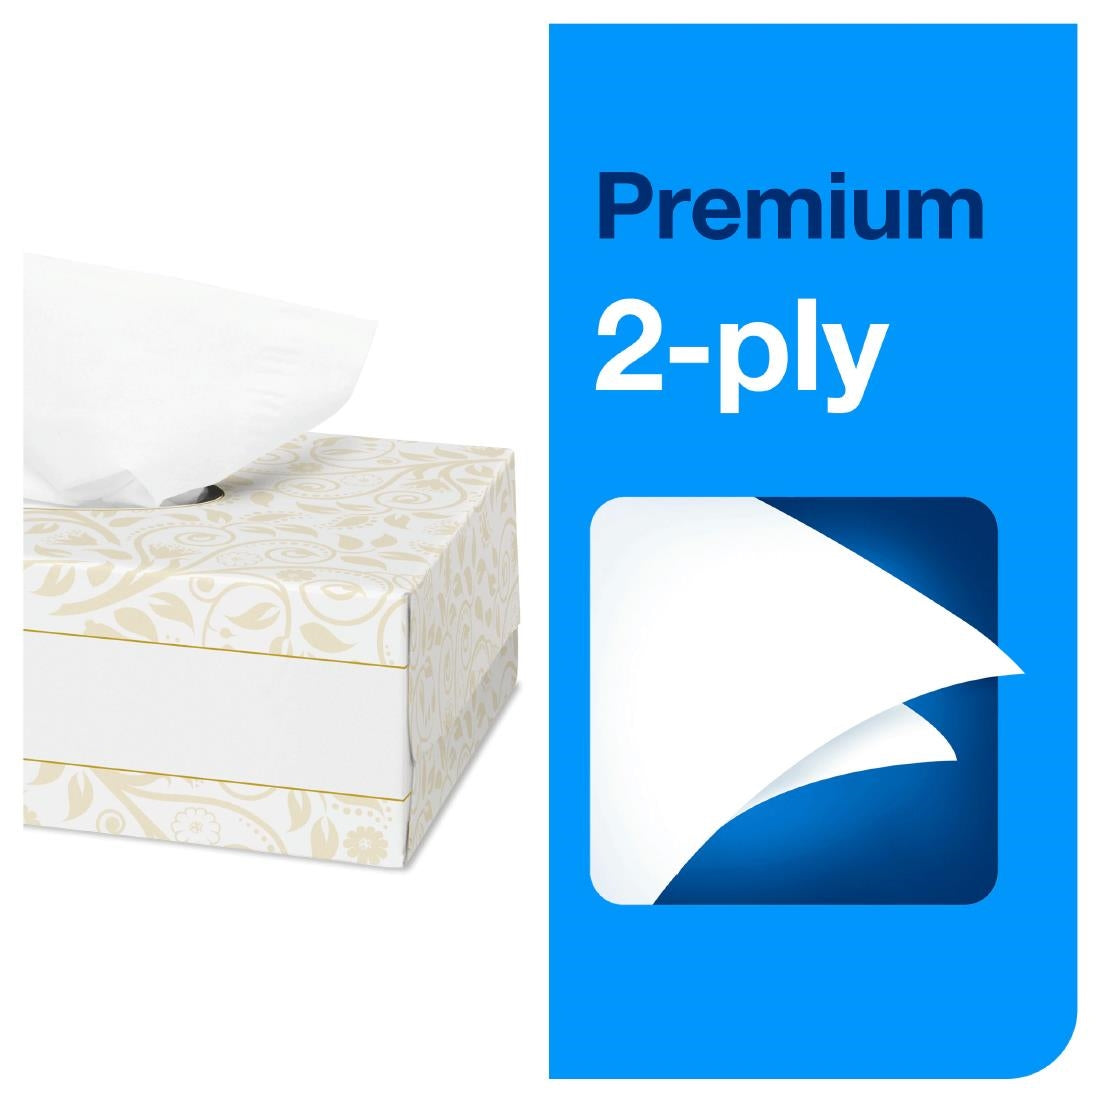 CH571 Tork Premium Extra Soft Facial Tissues 2ply (30x100) JD Catering Equipment Solutions Ltd